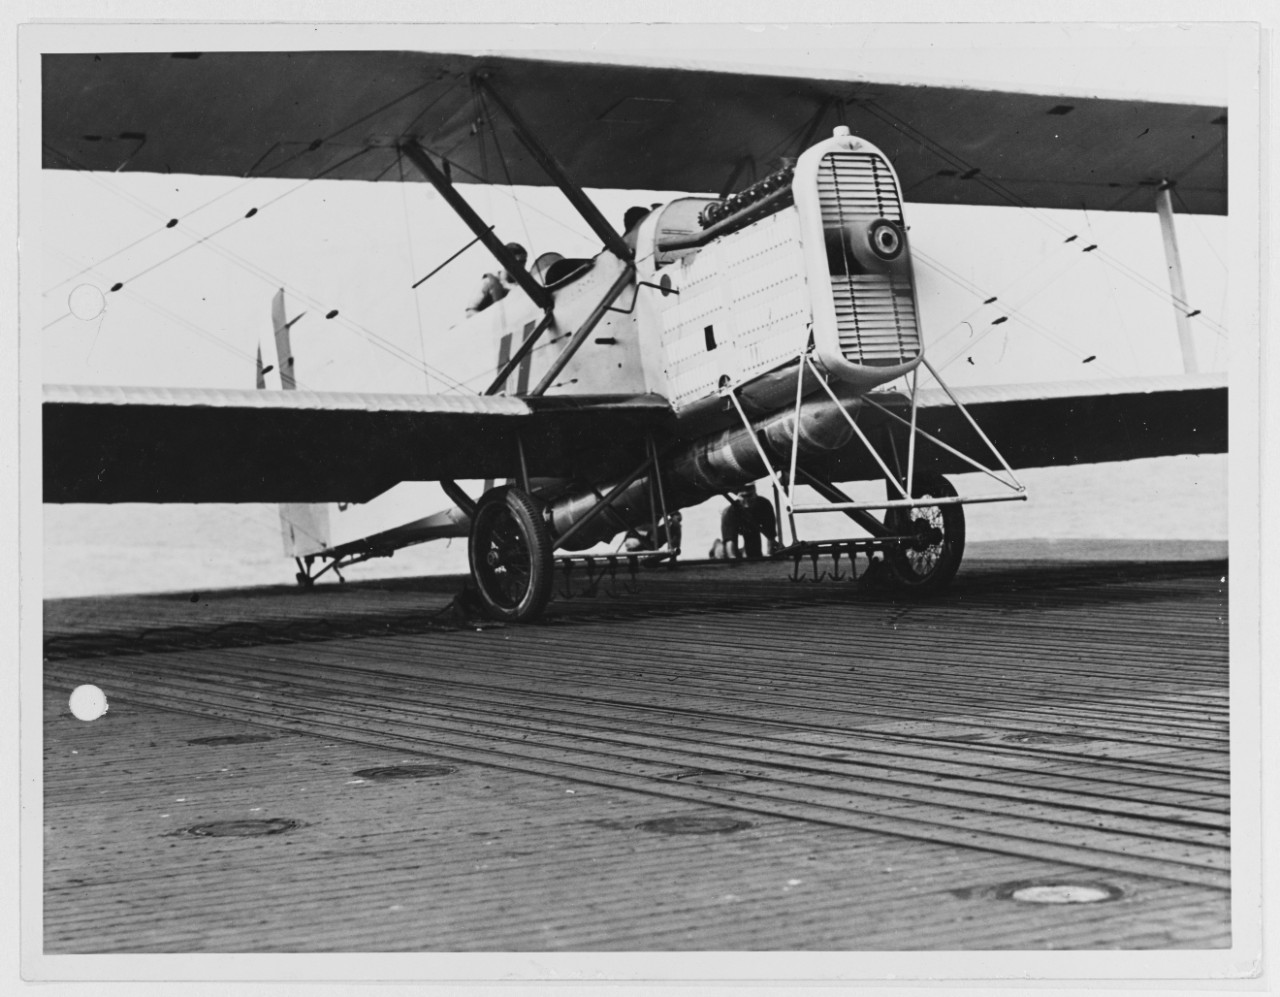 DT Plane with tanks in place of torpedo 10N US Carrier